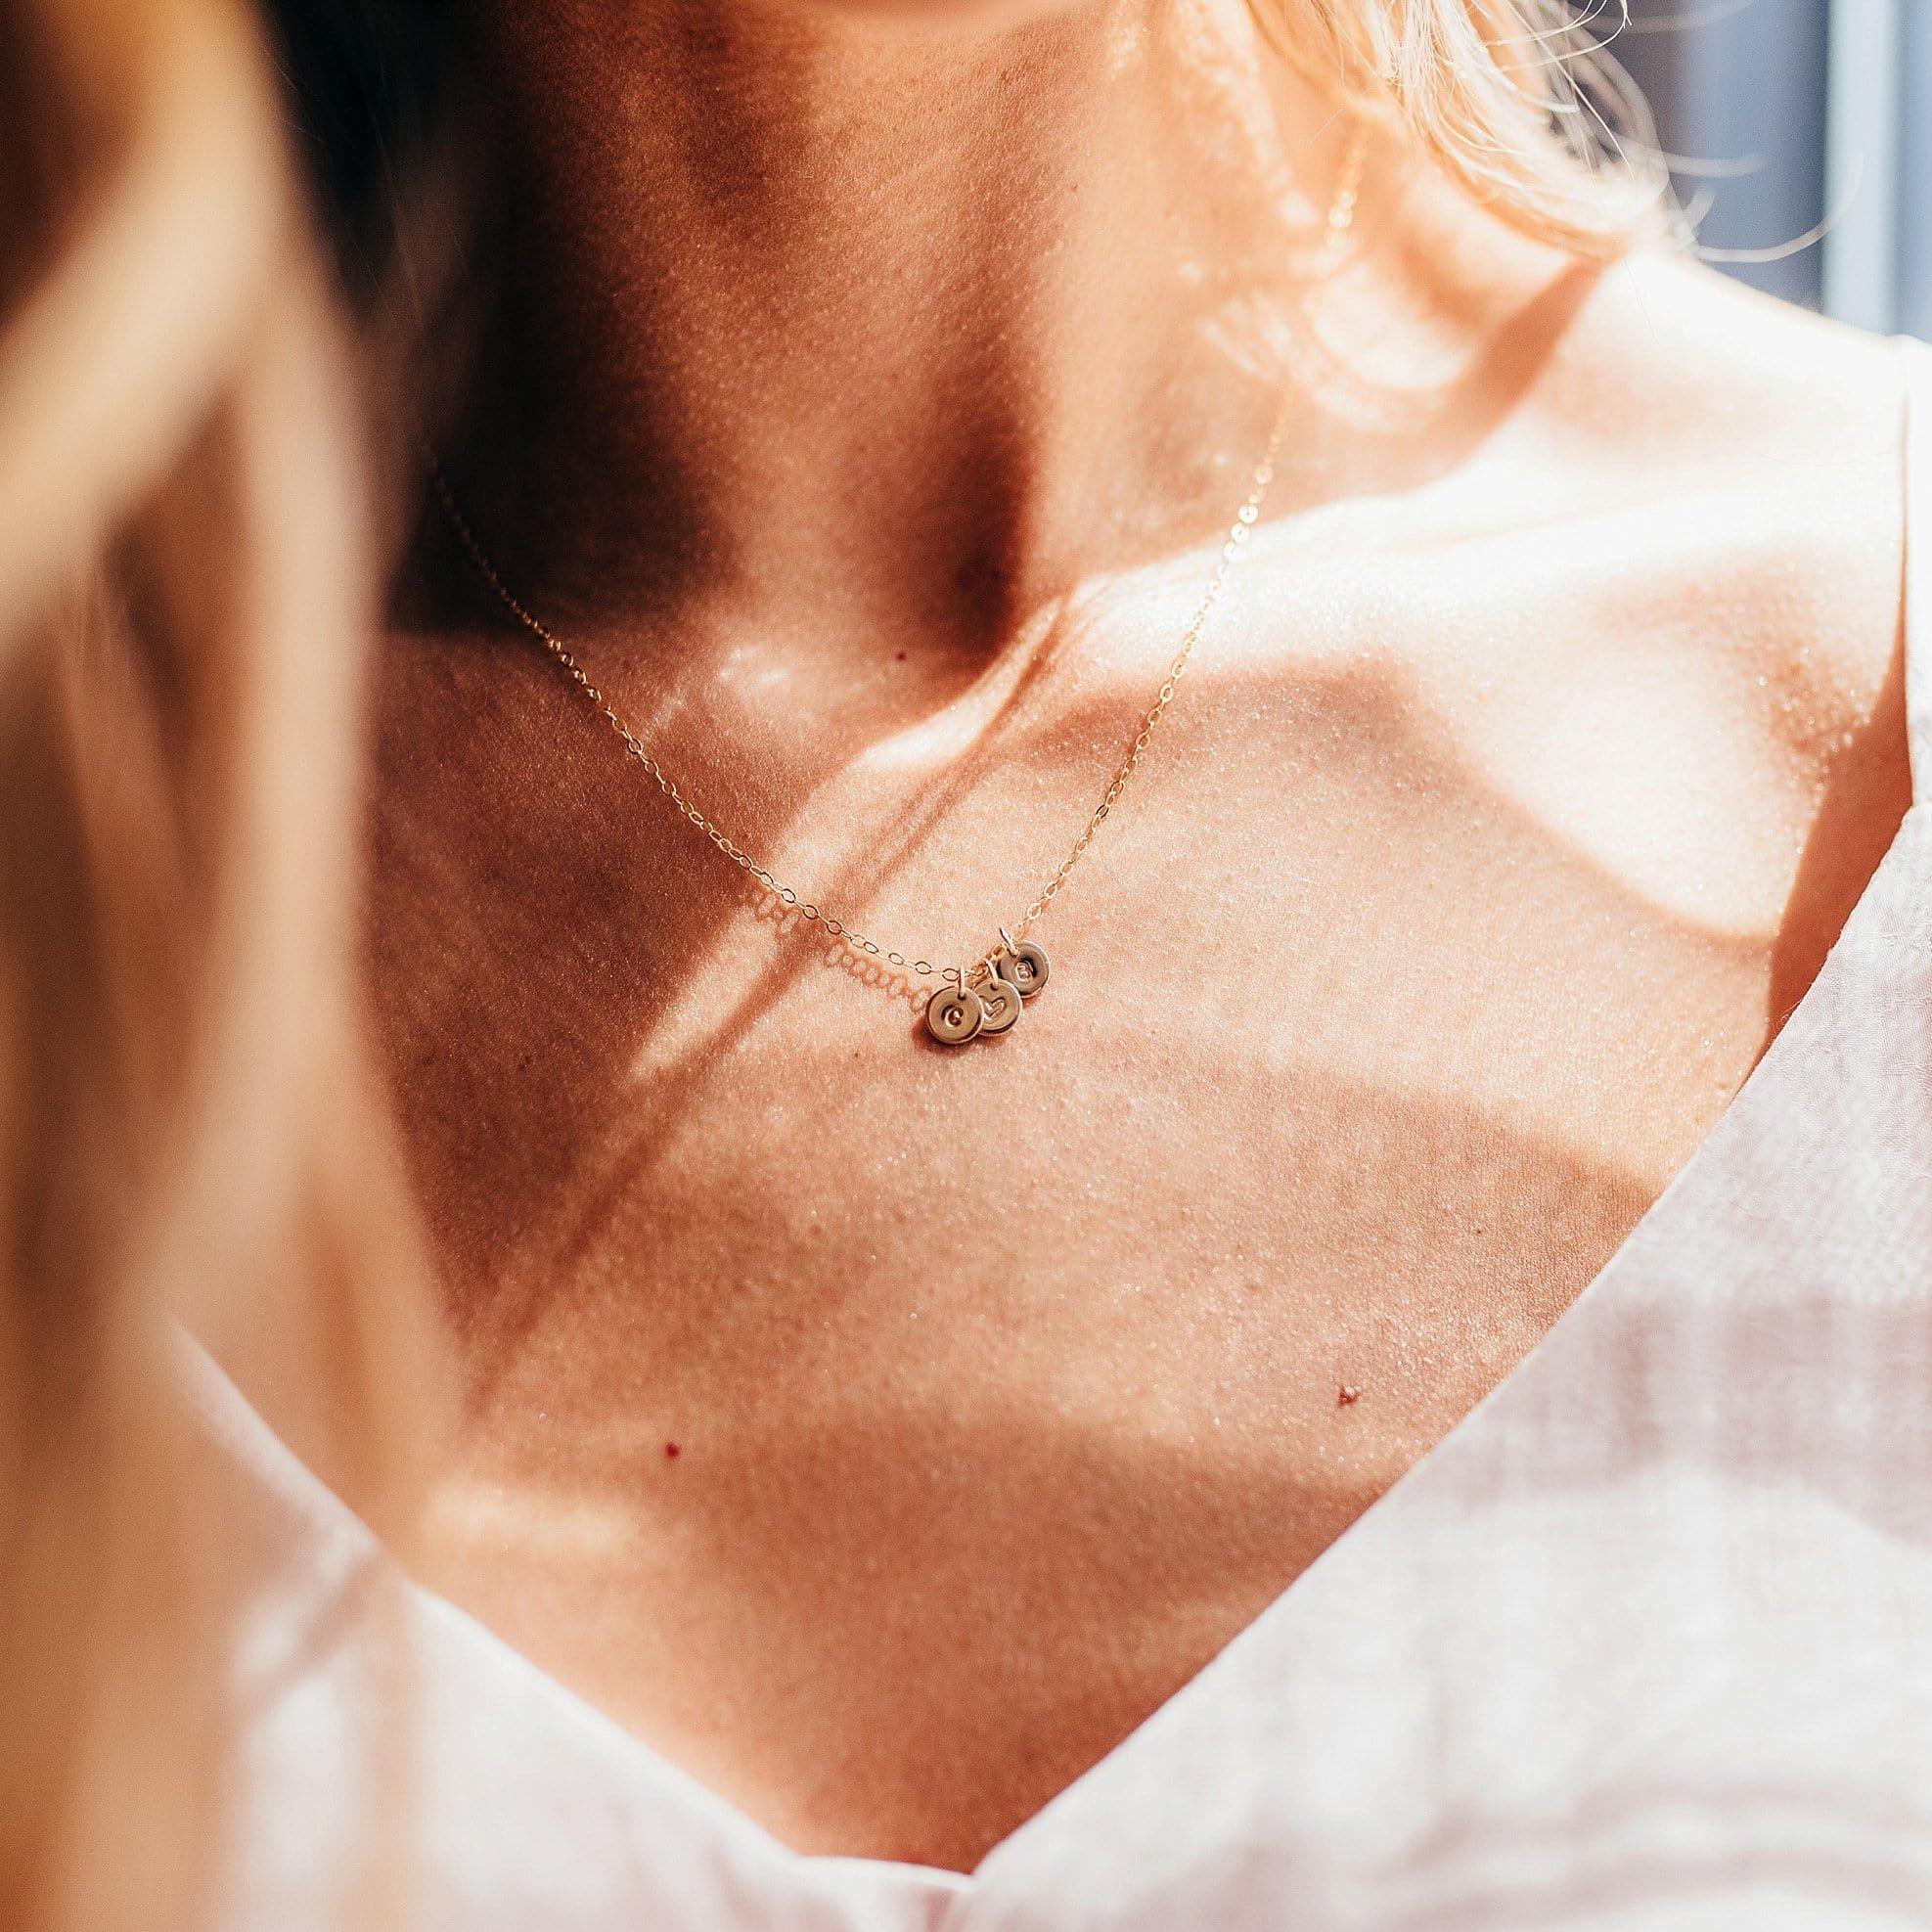 Tiny Initial Necklace - Nolia Jewelry - Meaningful + Sustainably Handcrafted Jewelry